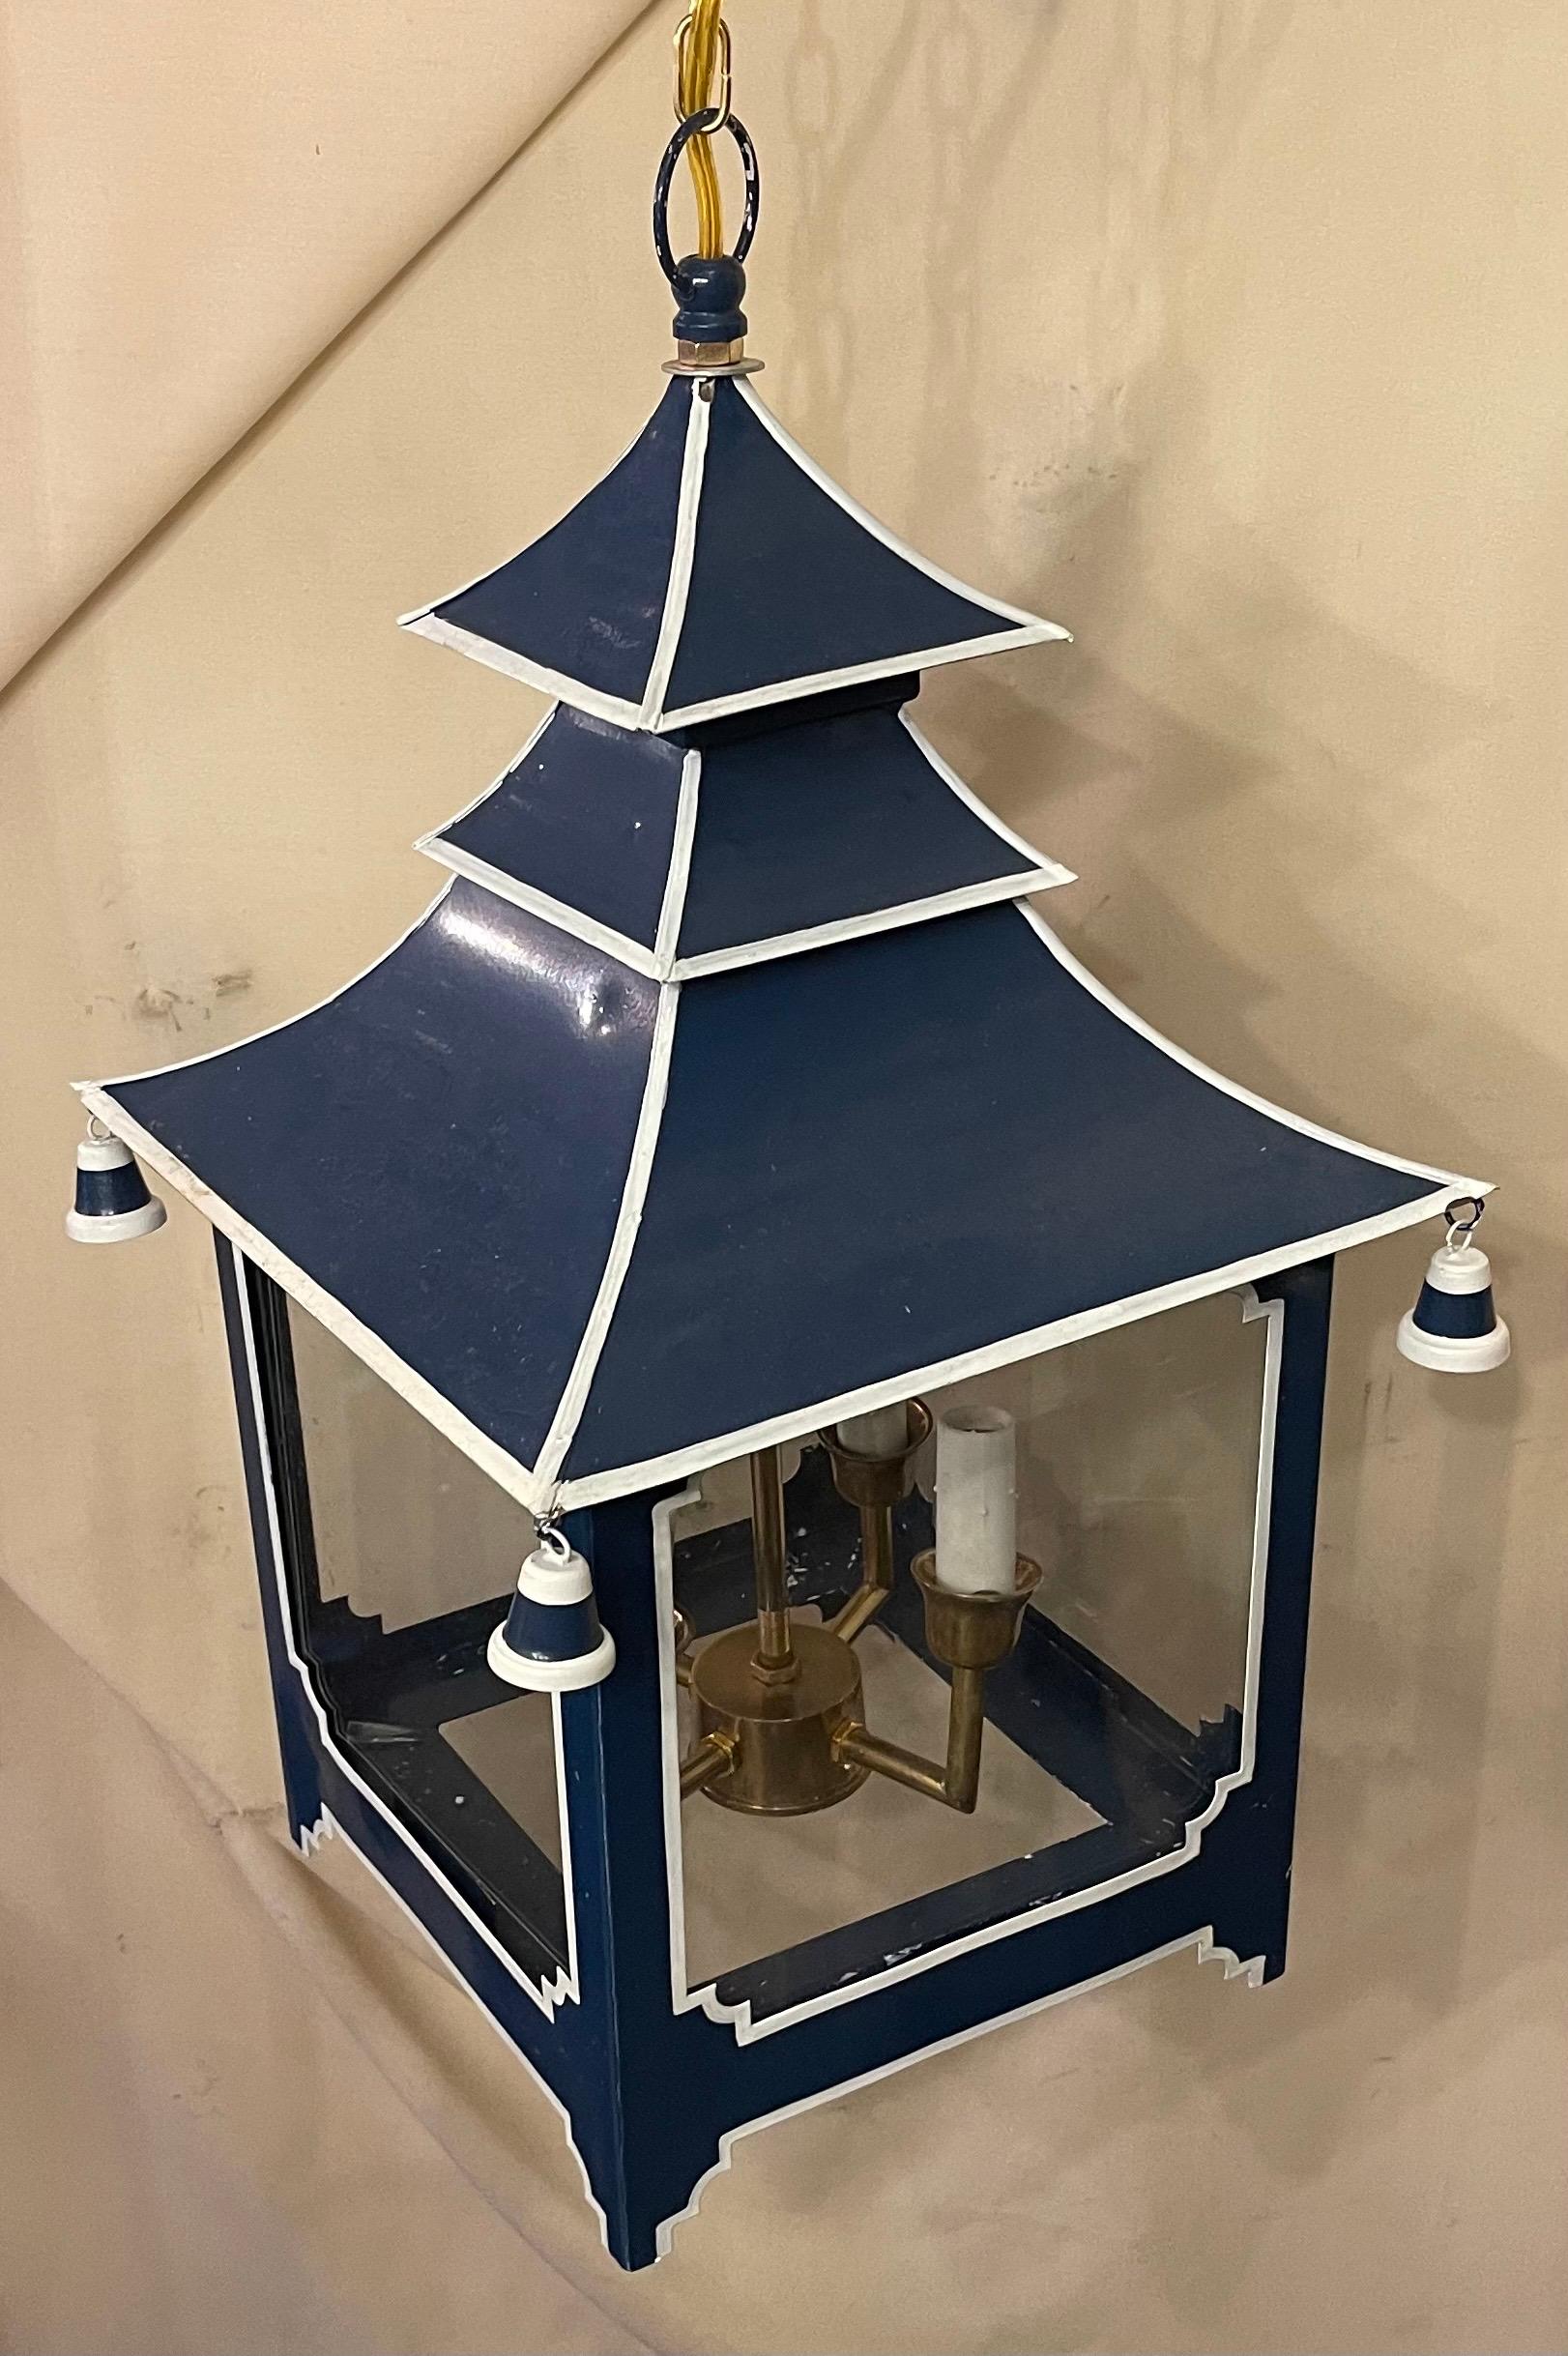 Painted Wonderful Chinoiserie Pagoda Cobalt Blue White Enameled Glass Lantern Fixture For Sale